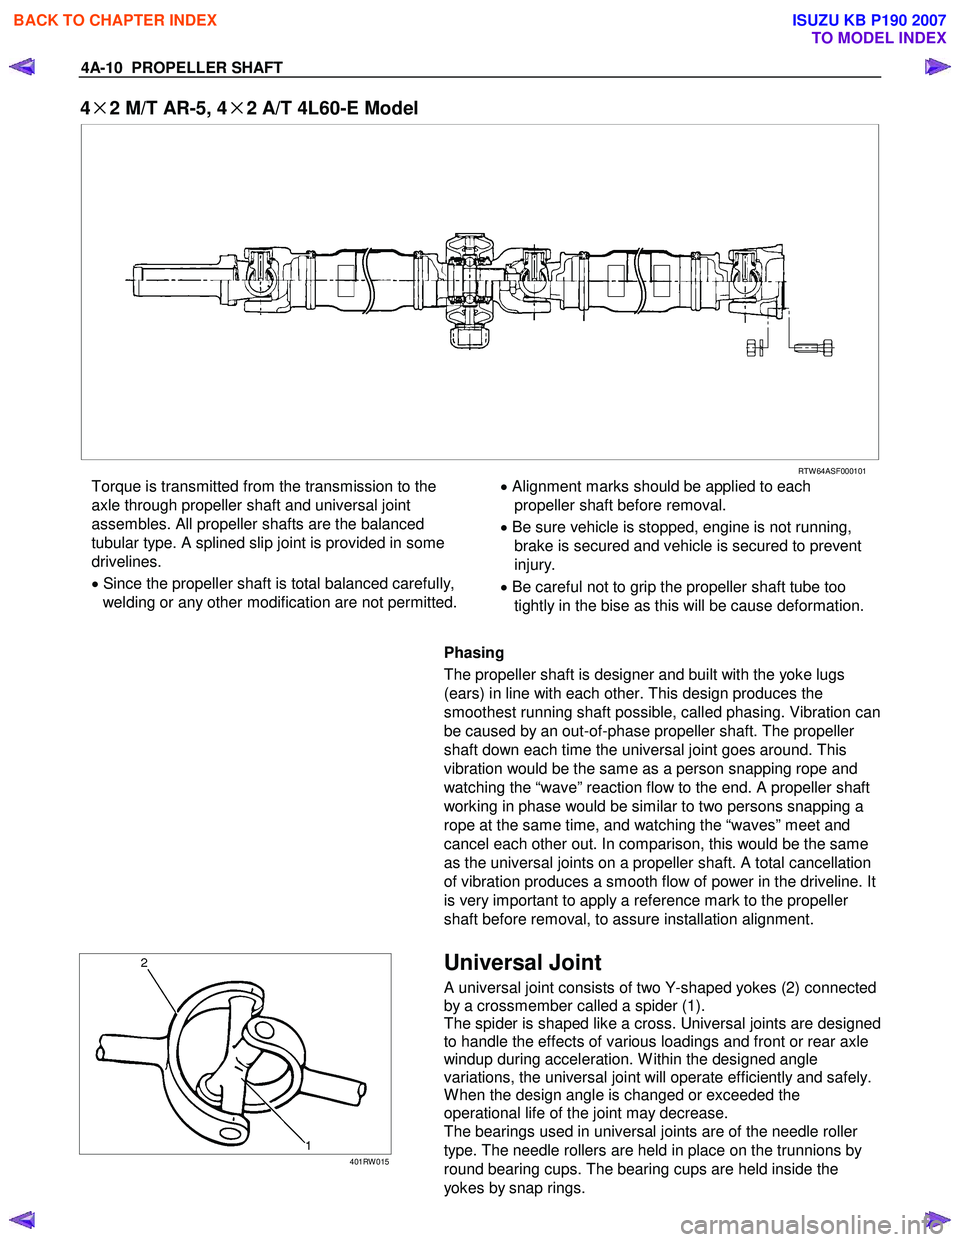 ISUZU KB P190 2007  Workshop Repair Manual 4A-10  PROPELLER SHAFT 
4×
×× 
×
2 M/T AR-5, 4 ×
××
×
2 A/T 4L60-E Model  
   
  
  
 
  
 
 
 RTW 64ASF000101 
Torque is transmitted from the transmission to the  
axle through propeller shaf